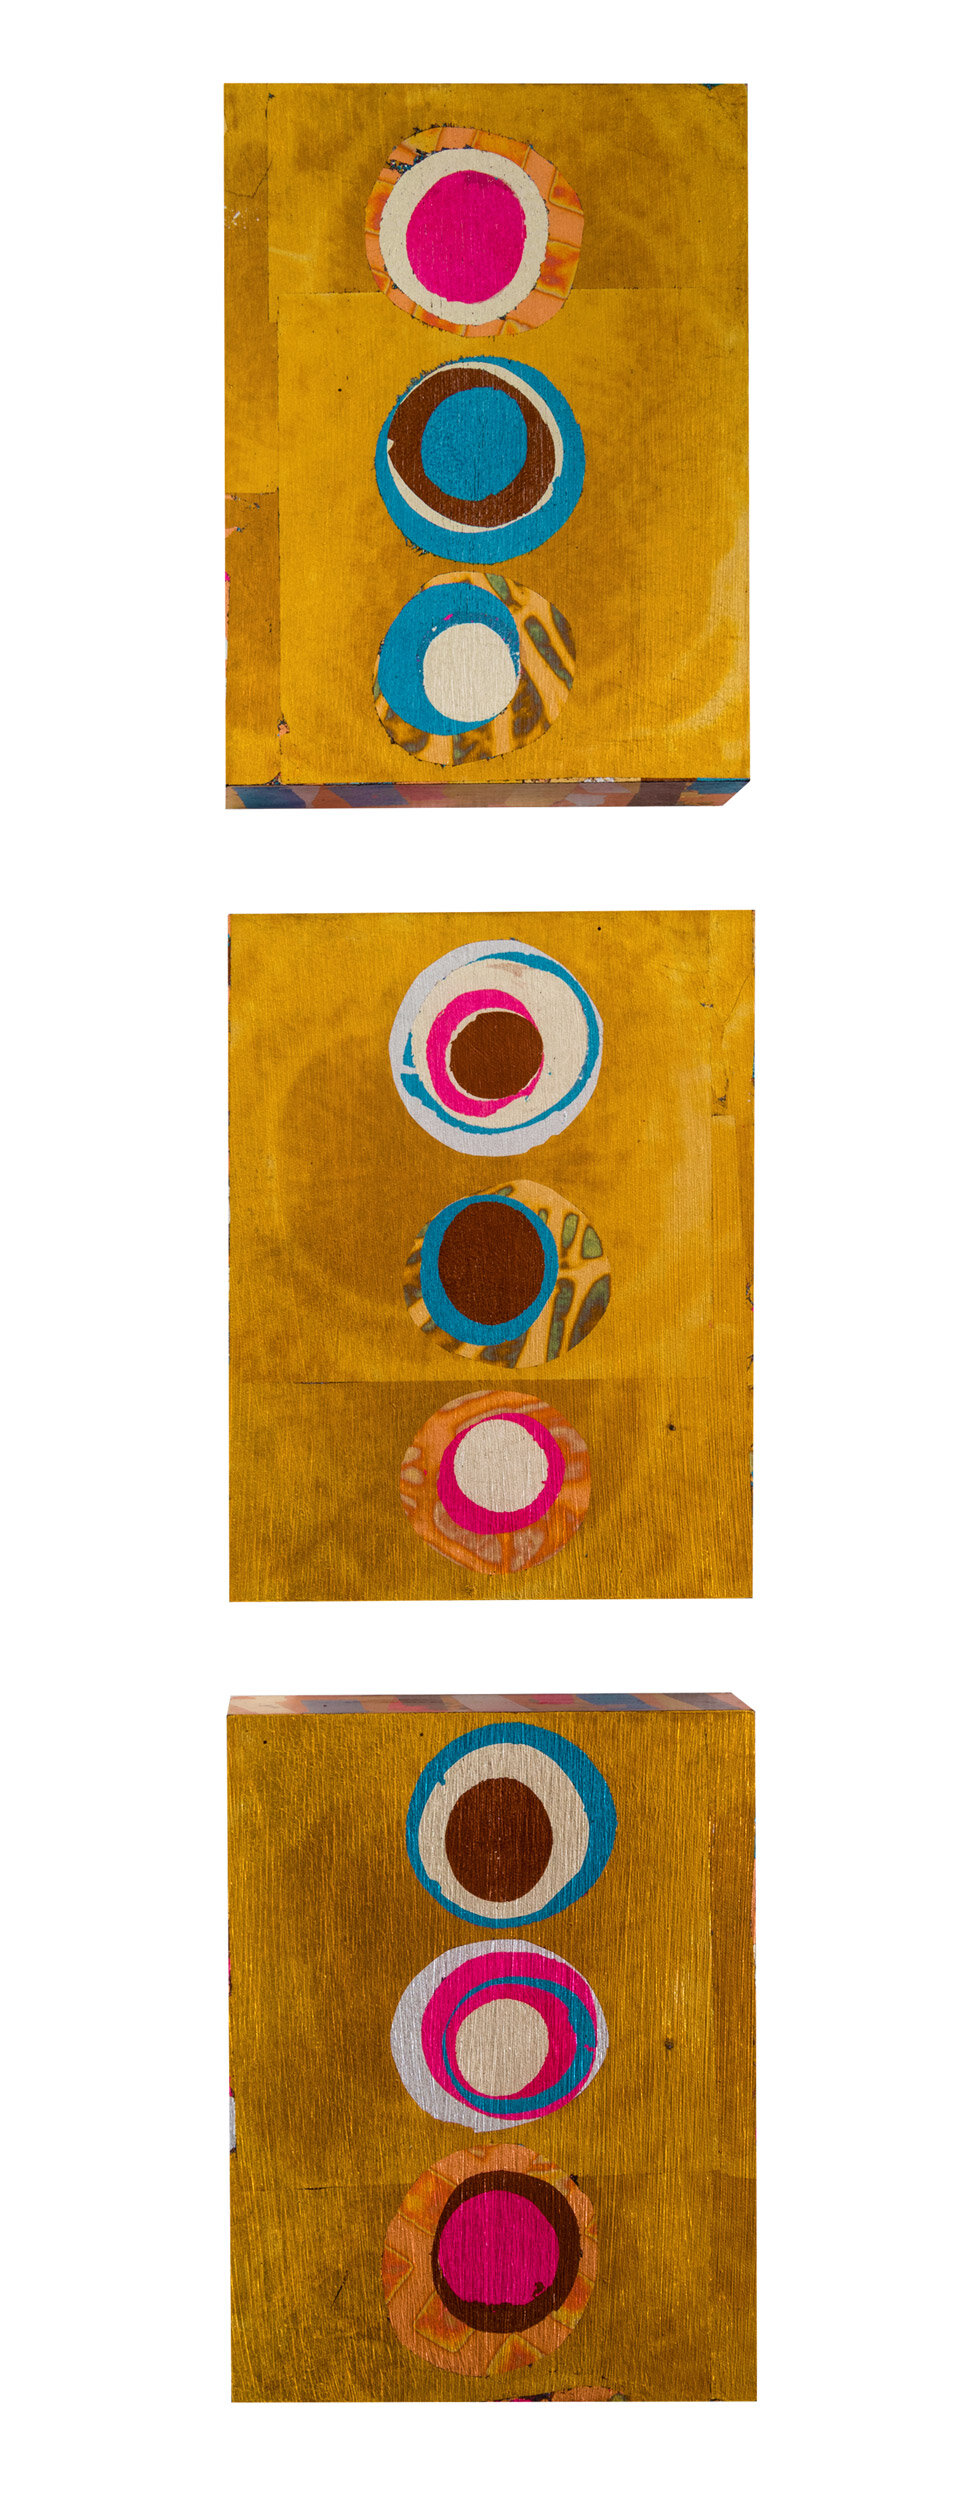 Untitled-(Gold-Triptych_2012_24'-x-6'-each_Multicolor-sterling-silver-leaf-on-wood_Sold-to-Charles-Lane-and-Tzok-Brenes.jpg